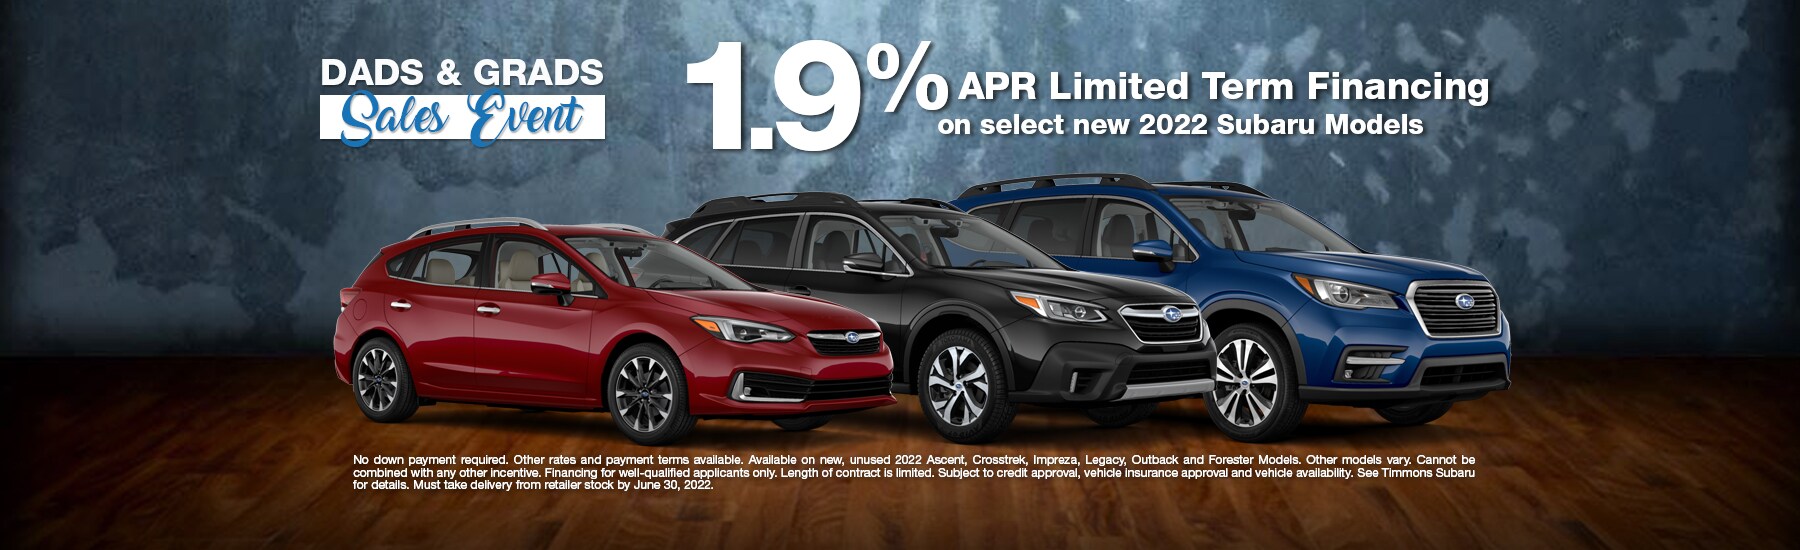 Special APR offer at Timmons Subaru Long Beach